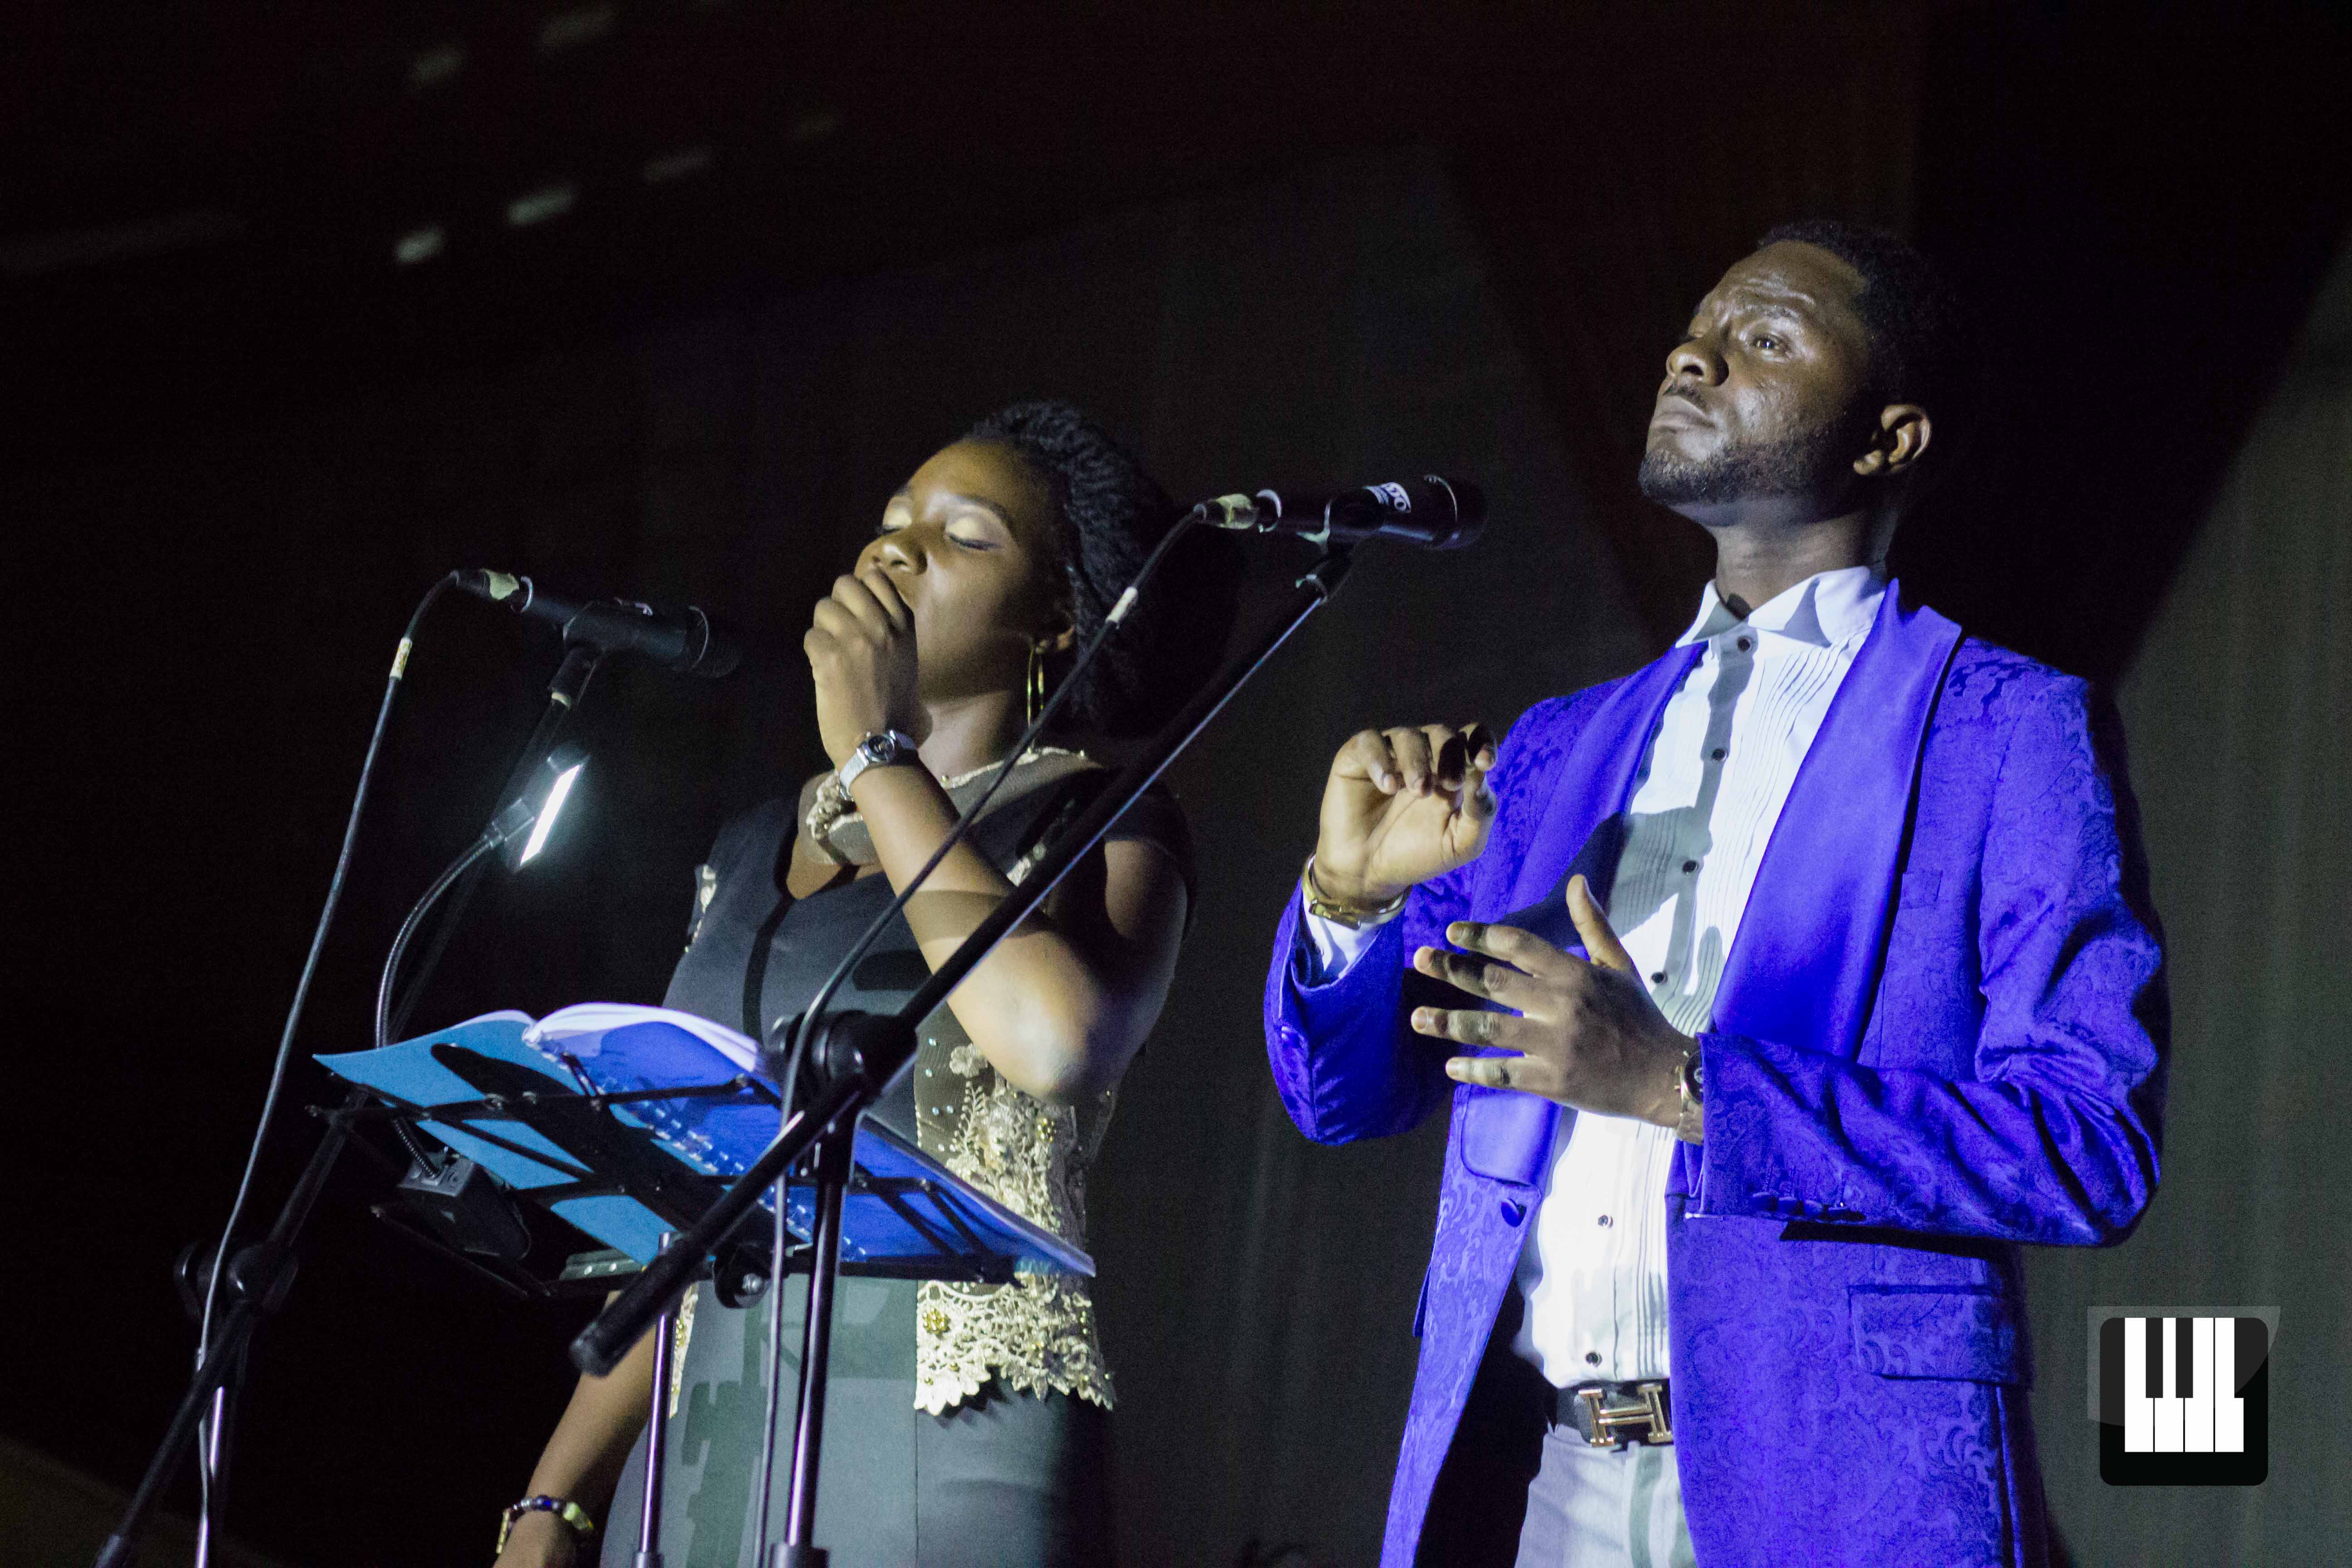 Klassicals of the Season at Easter Seasonal House's seasonal concert, Klassicals of the Season, explored the life of Christ in an unorthodox way at an intimate concert held in Accra. Jesse talks about his first Seasonal House concert.